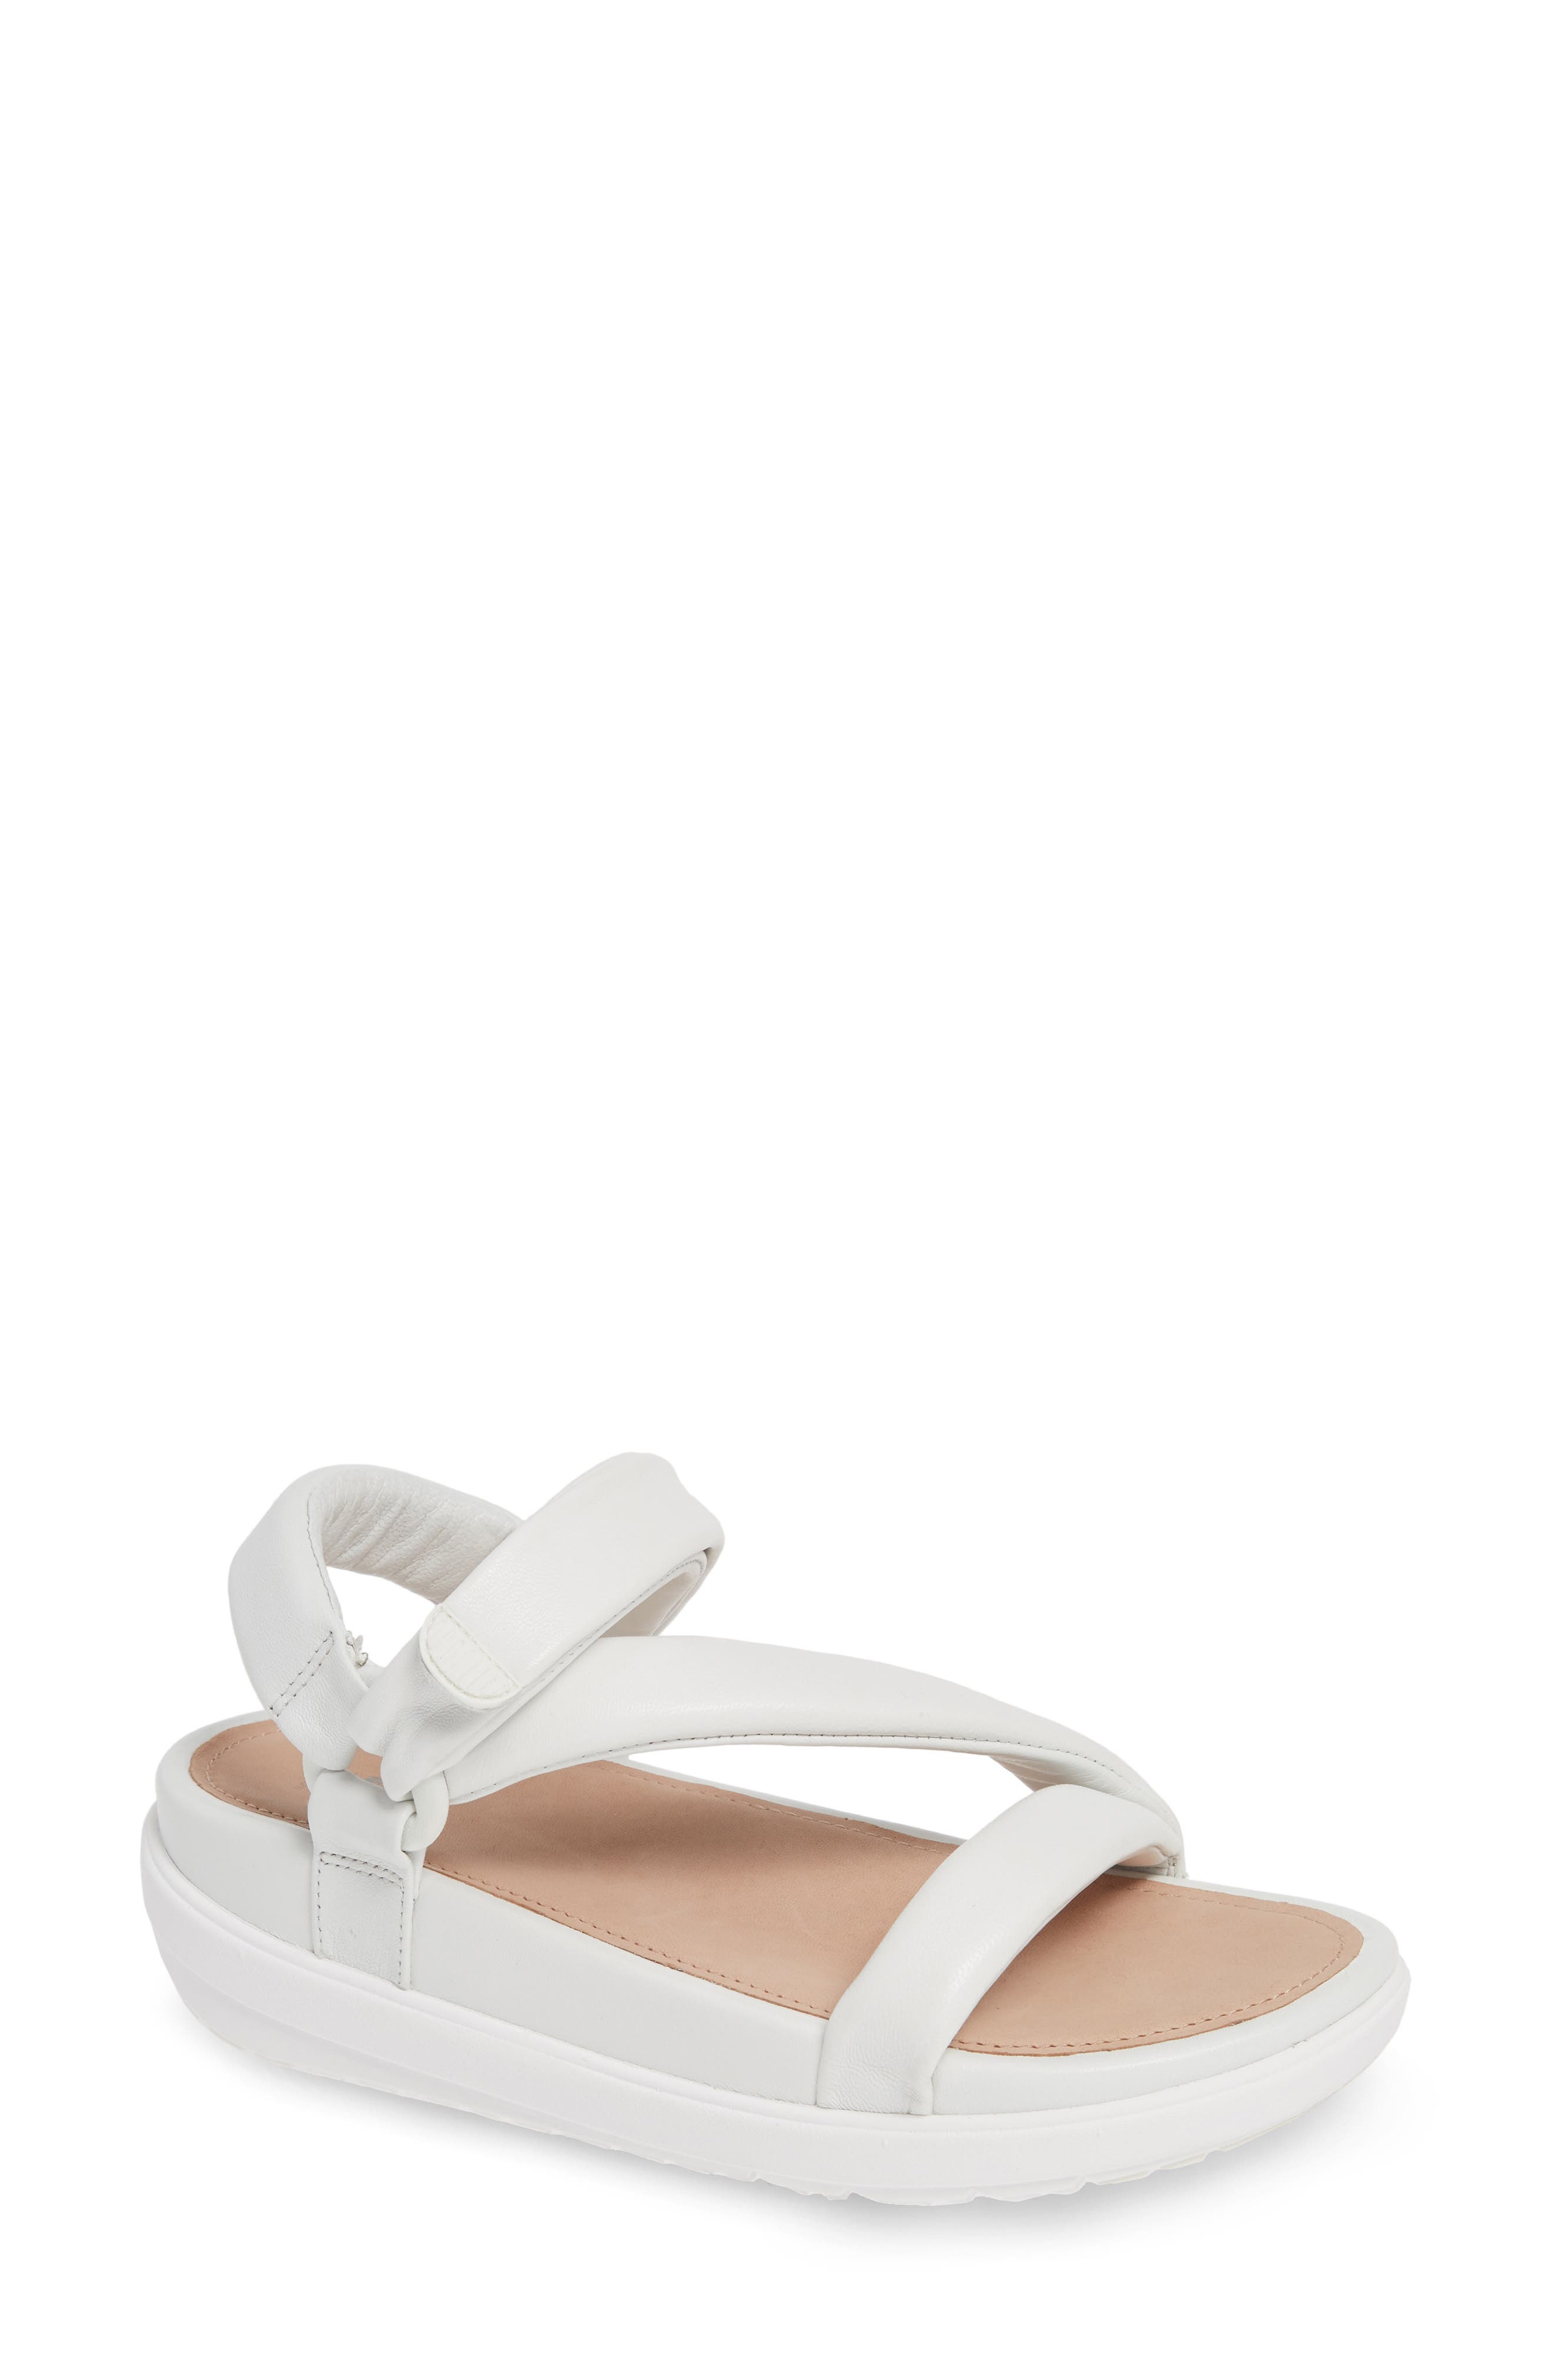 fitflop z strap sandals